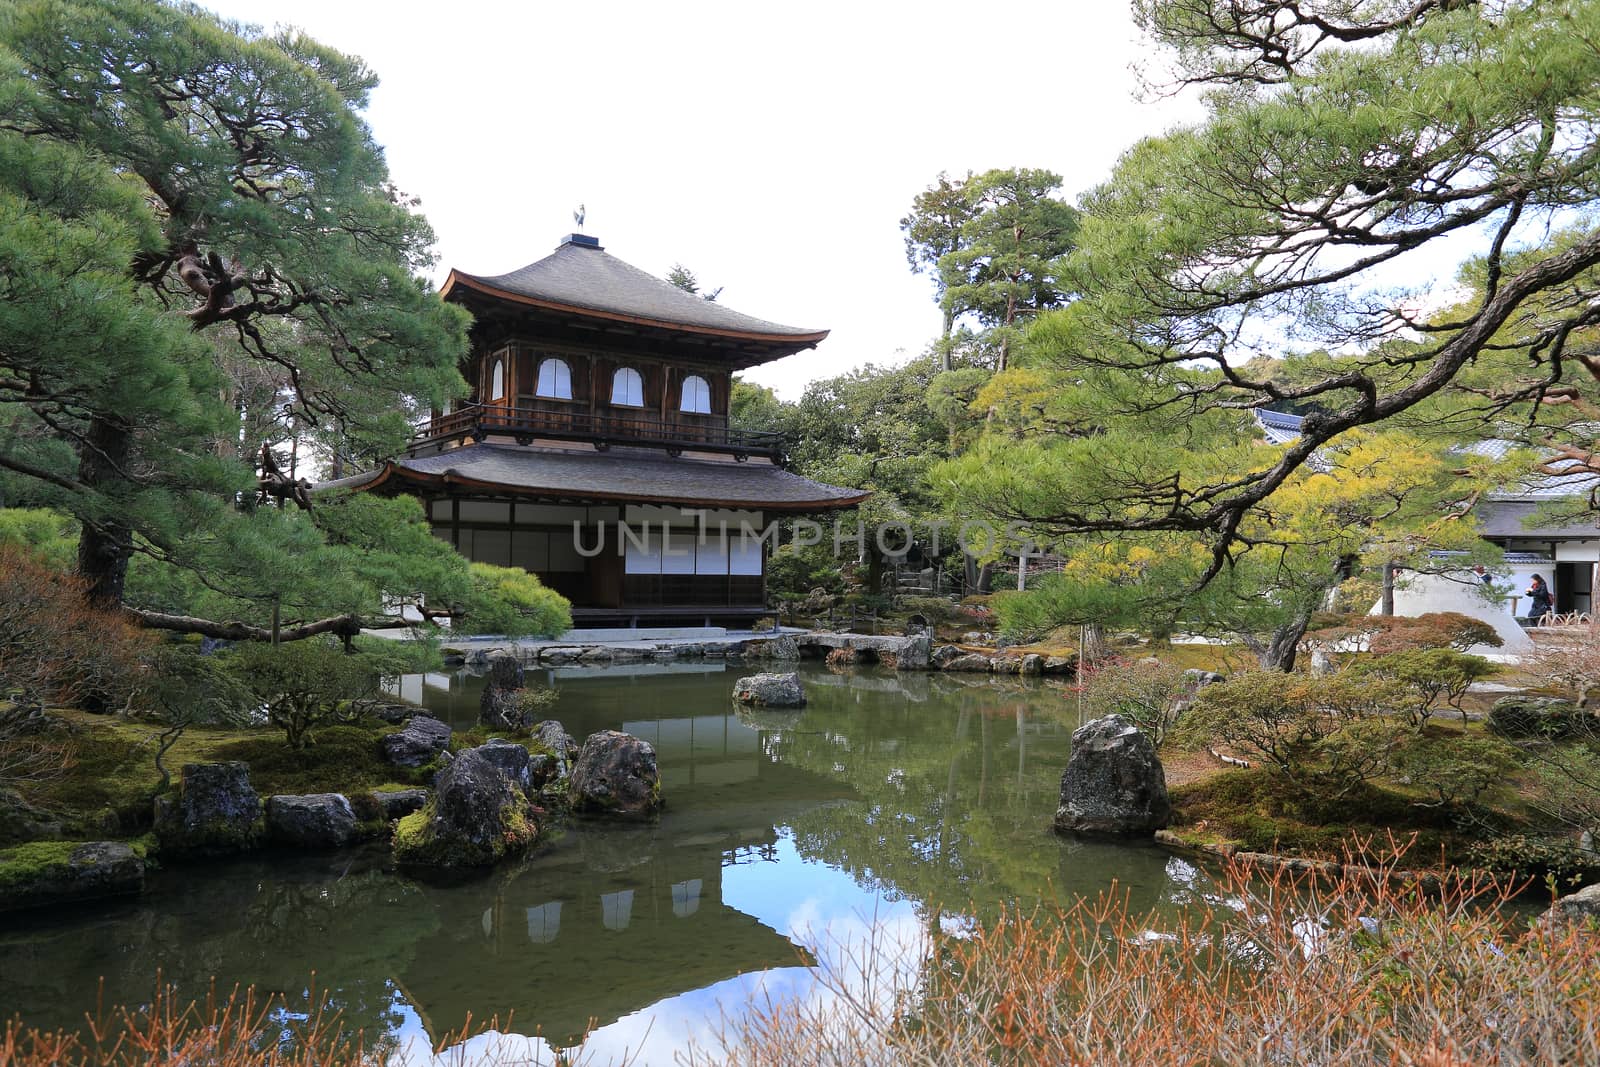 Ginkaku-ji or Temple of the Silver Pavilion, in the historic city of Kyoto in Japan.